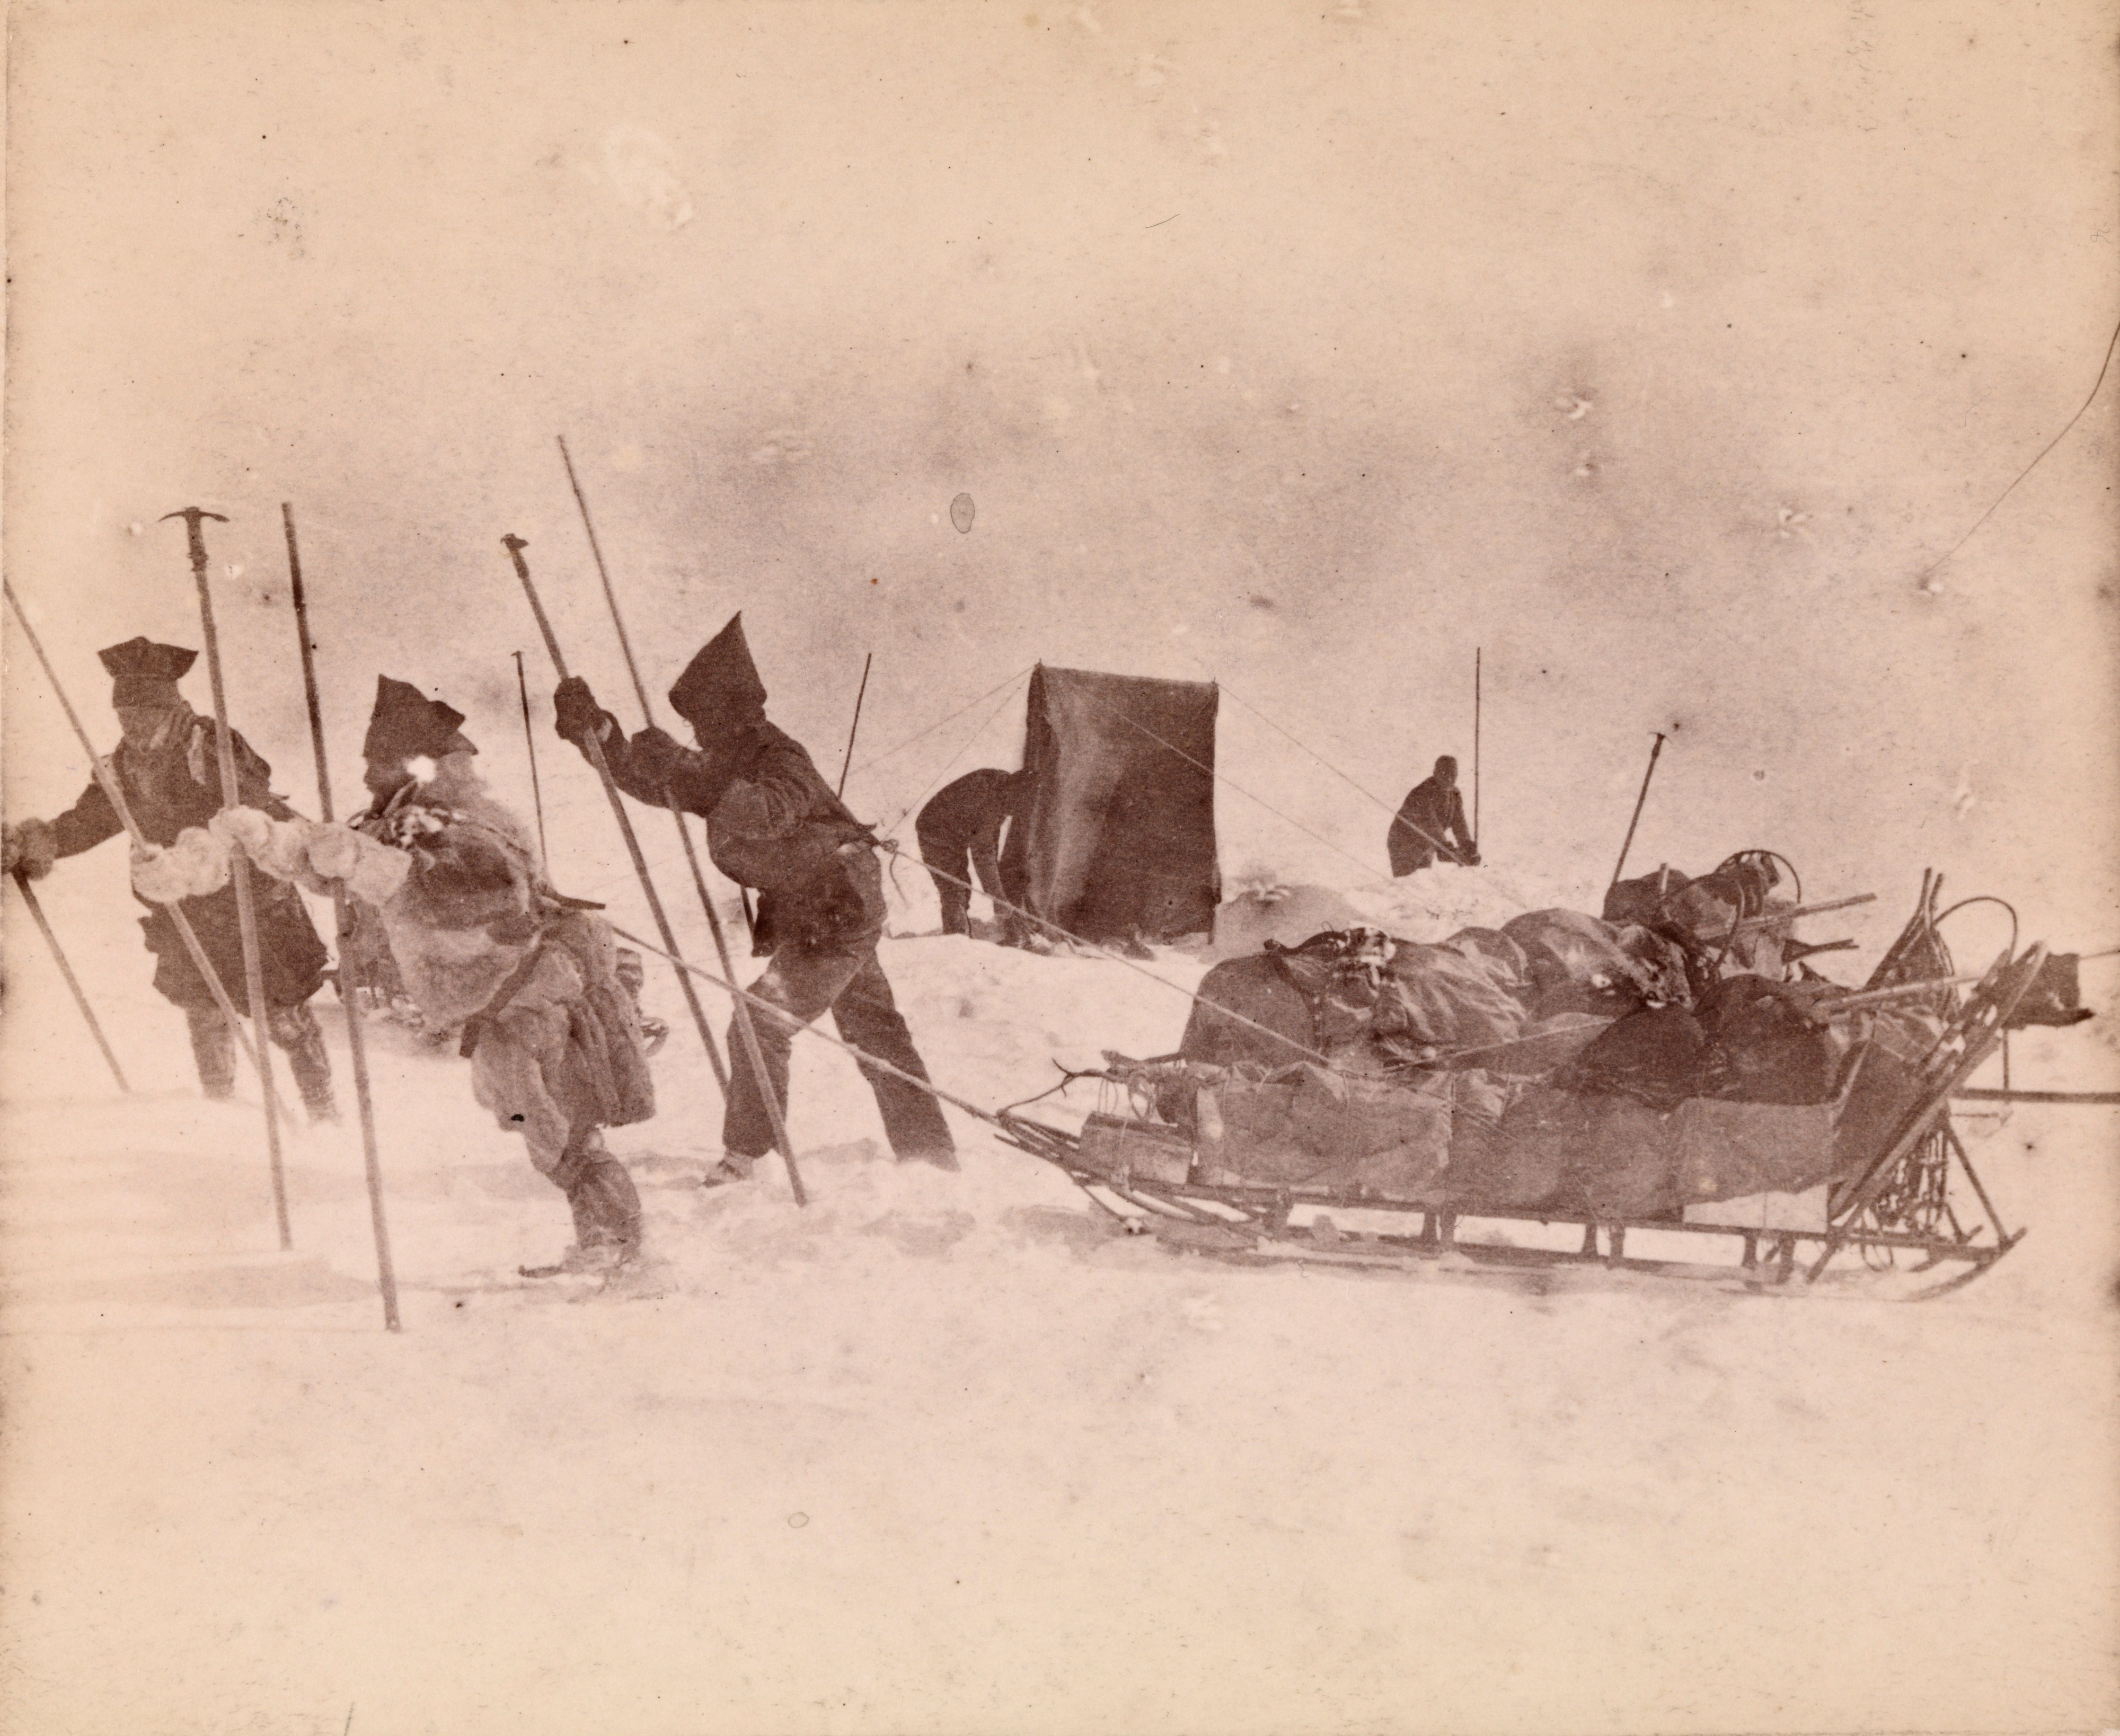 Nansen's Greenland expedition crossing